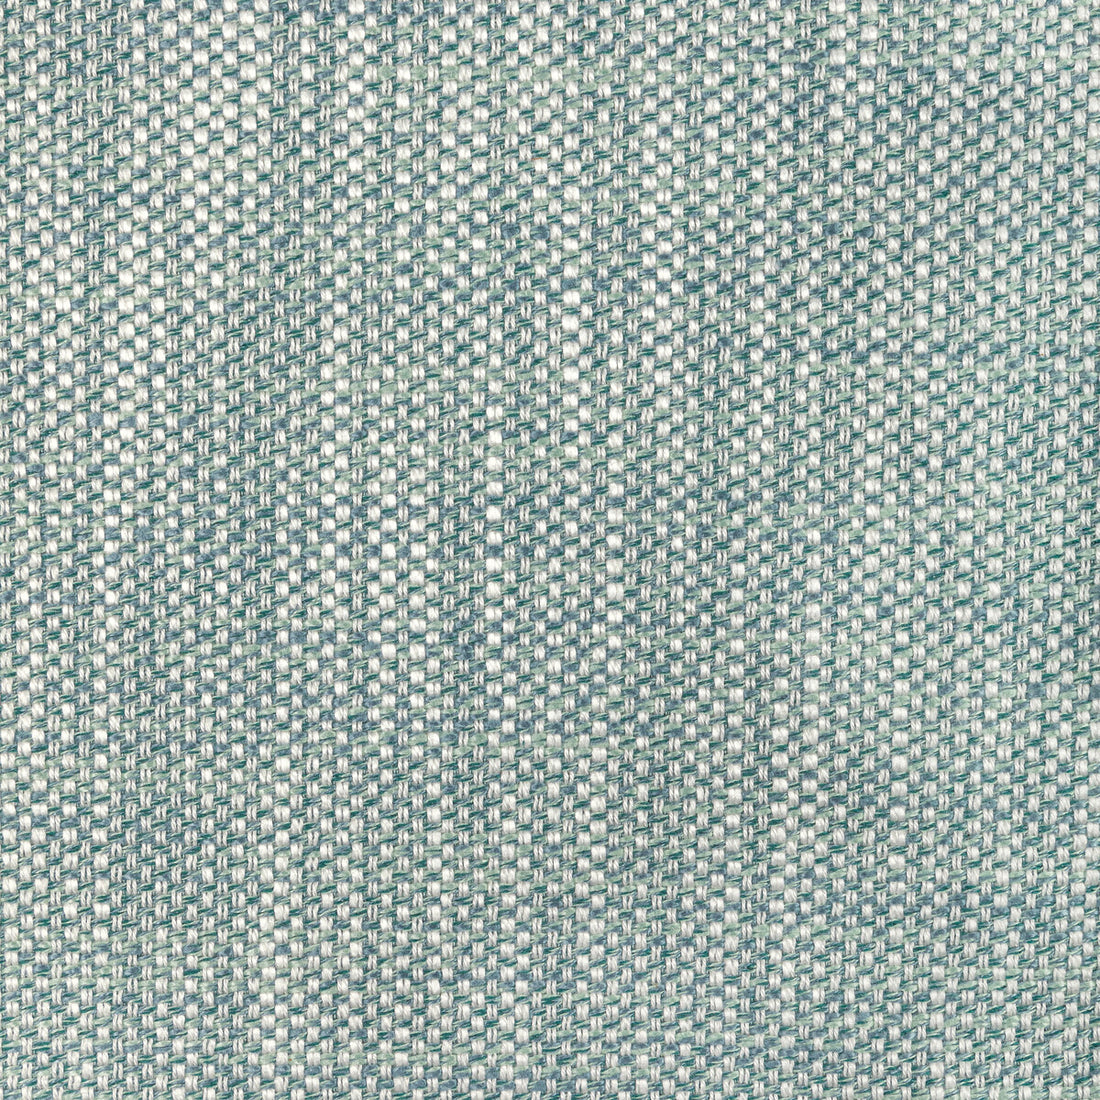 Kravet Design fabric in 36414-1135 color - pattern 36414.1135.0 - by Kravet Design in the Performance Crypton Home collection